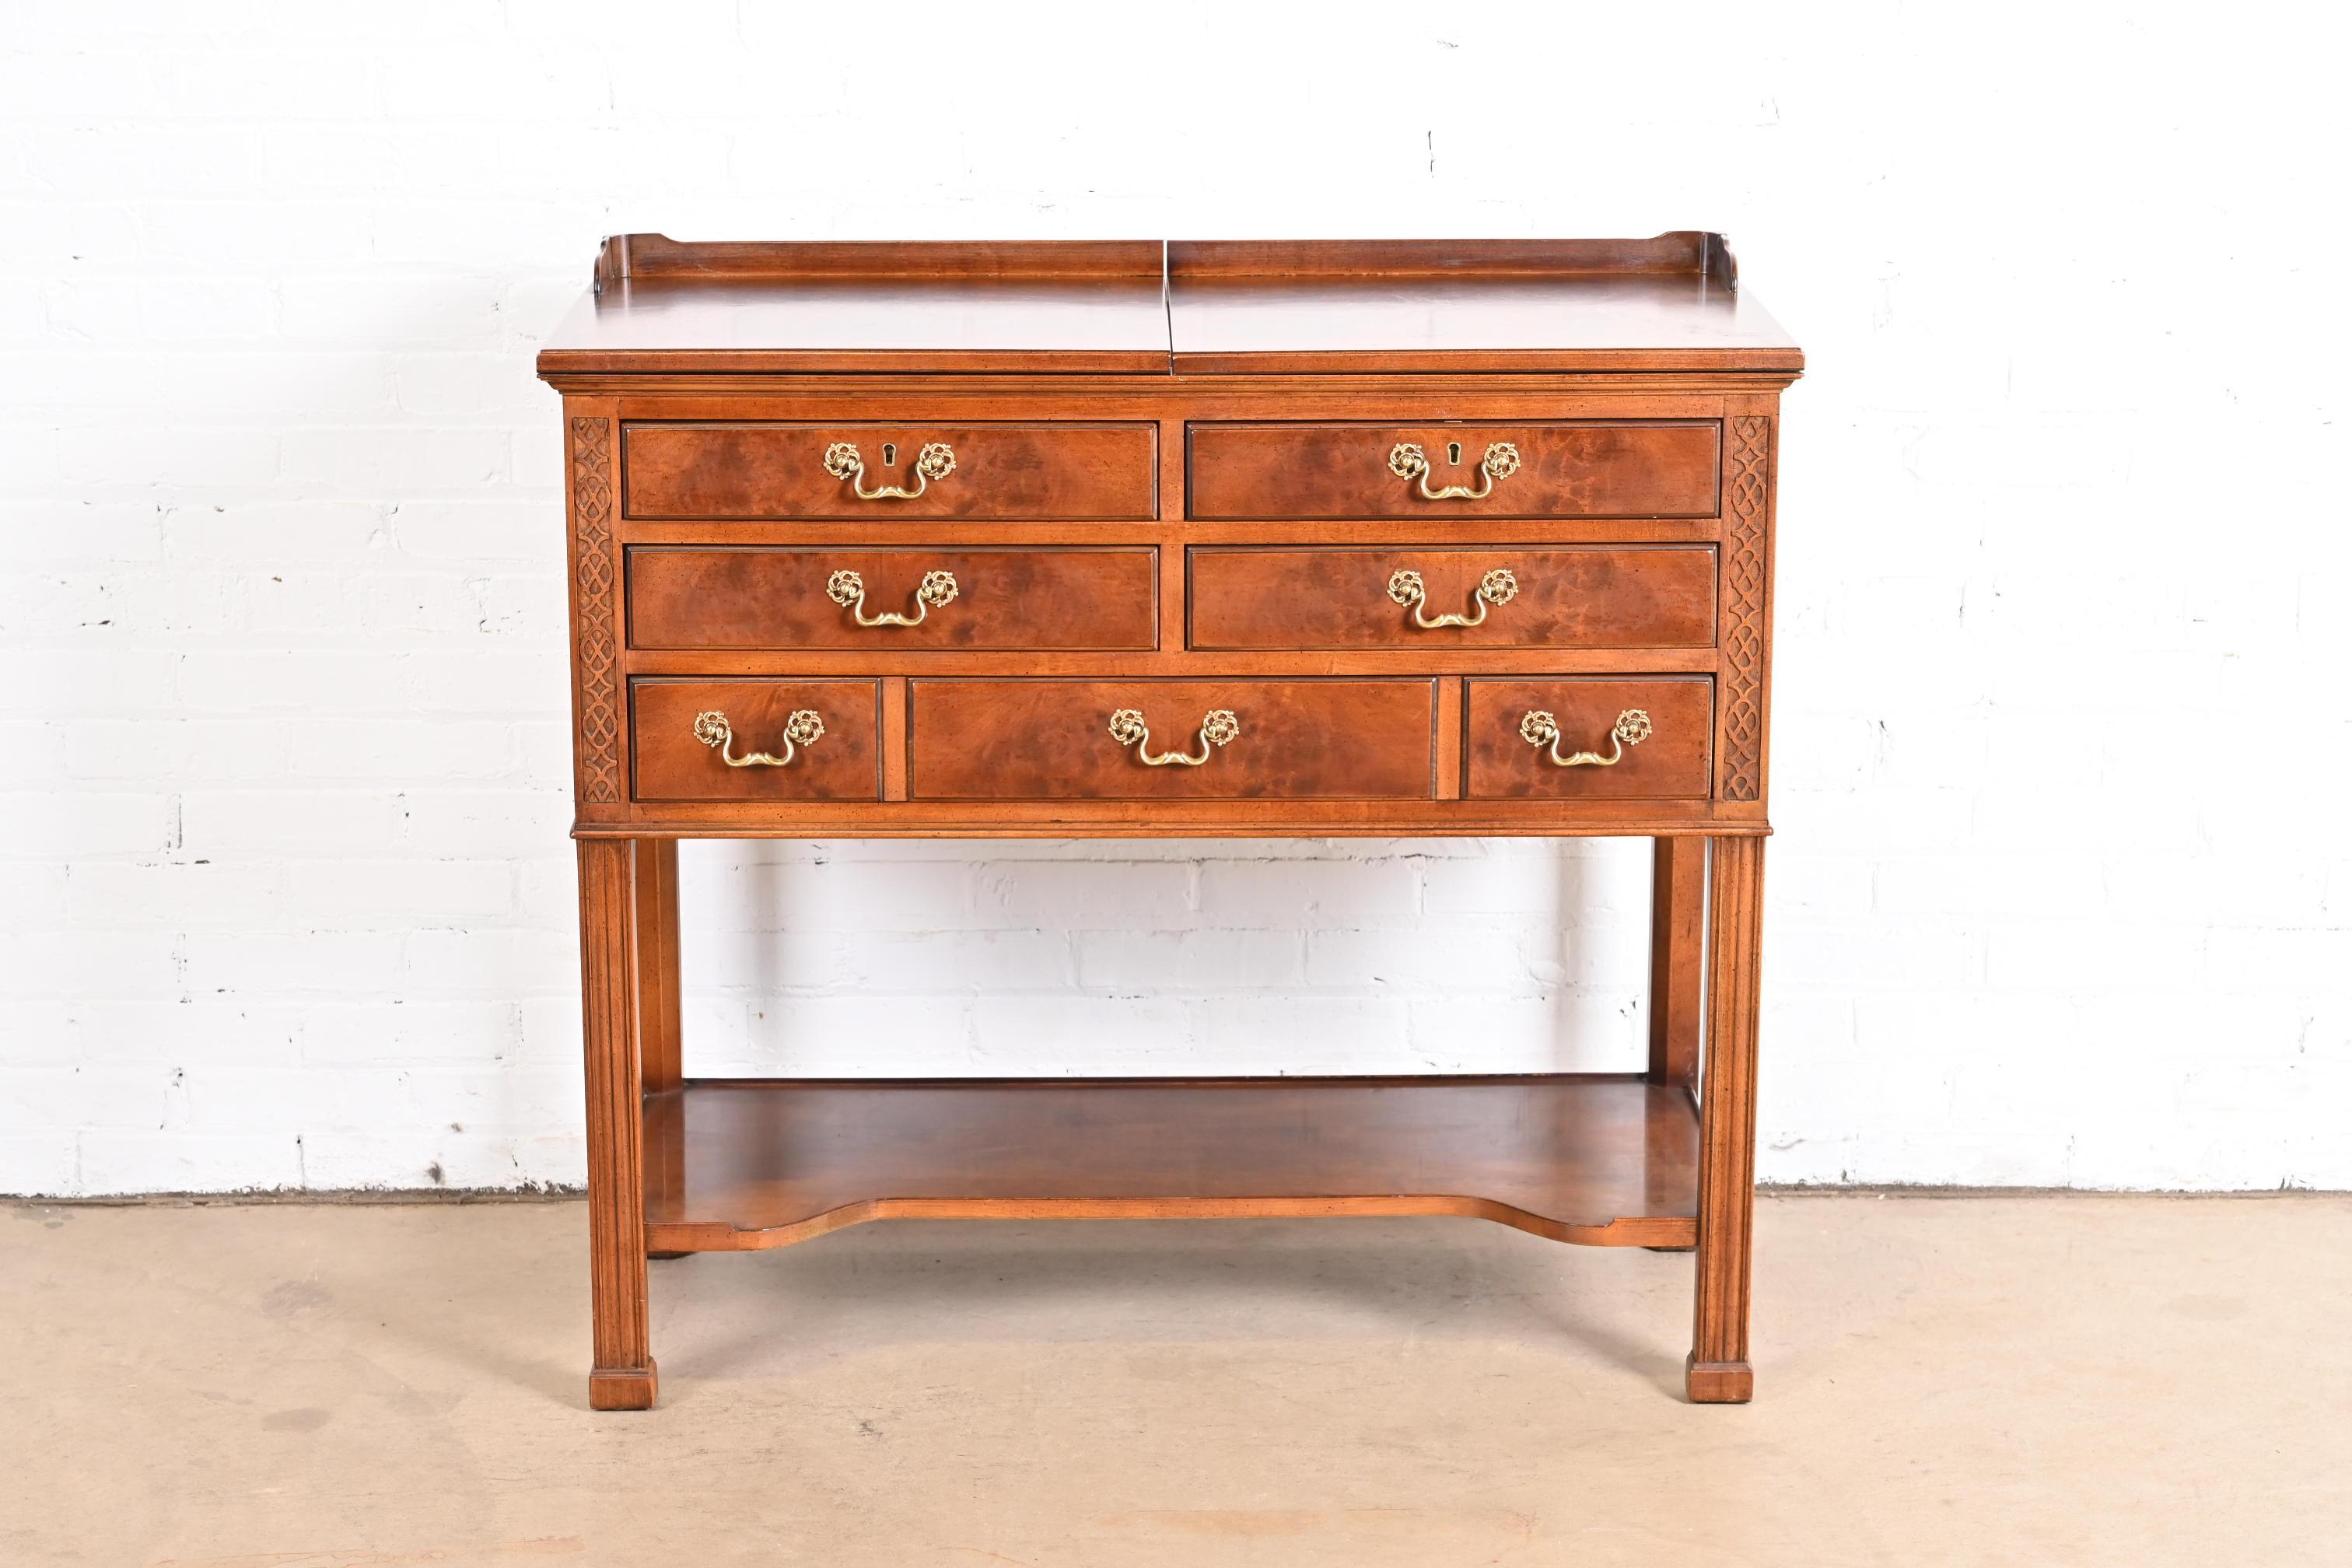 A gorgeous Georgian or Chippendale style flip top buffet server or bar cabinet

By Henredon, 